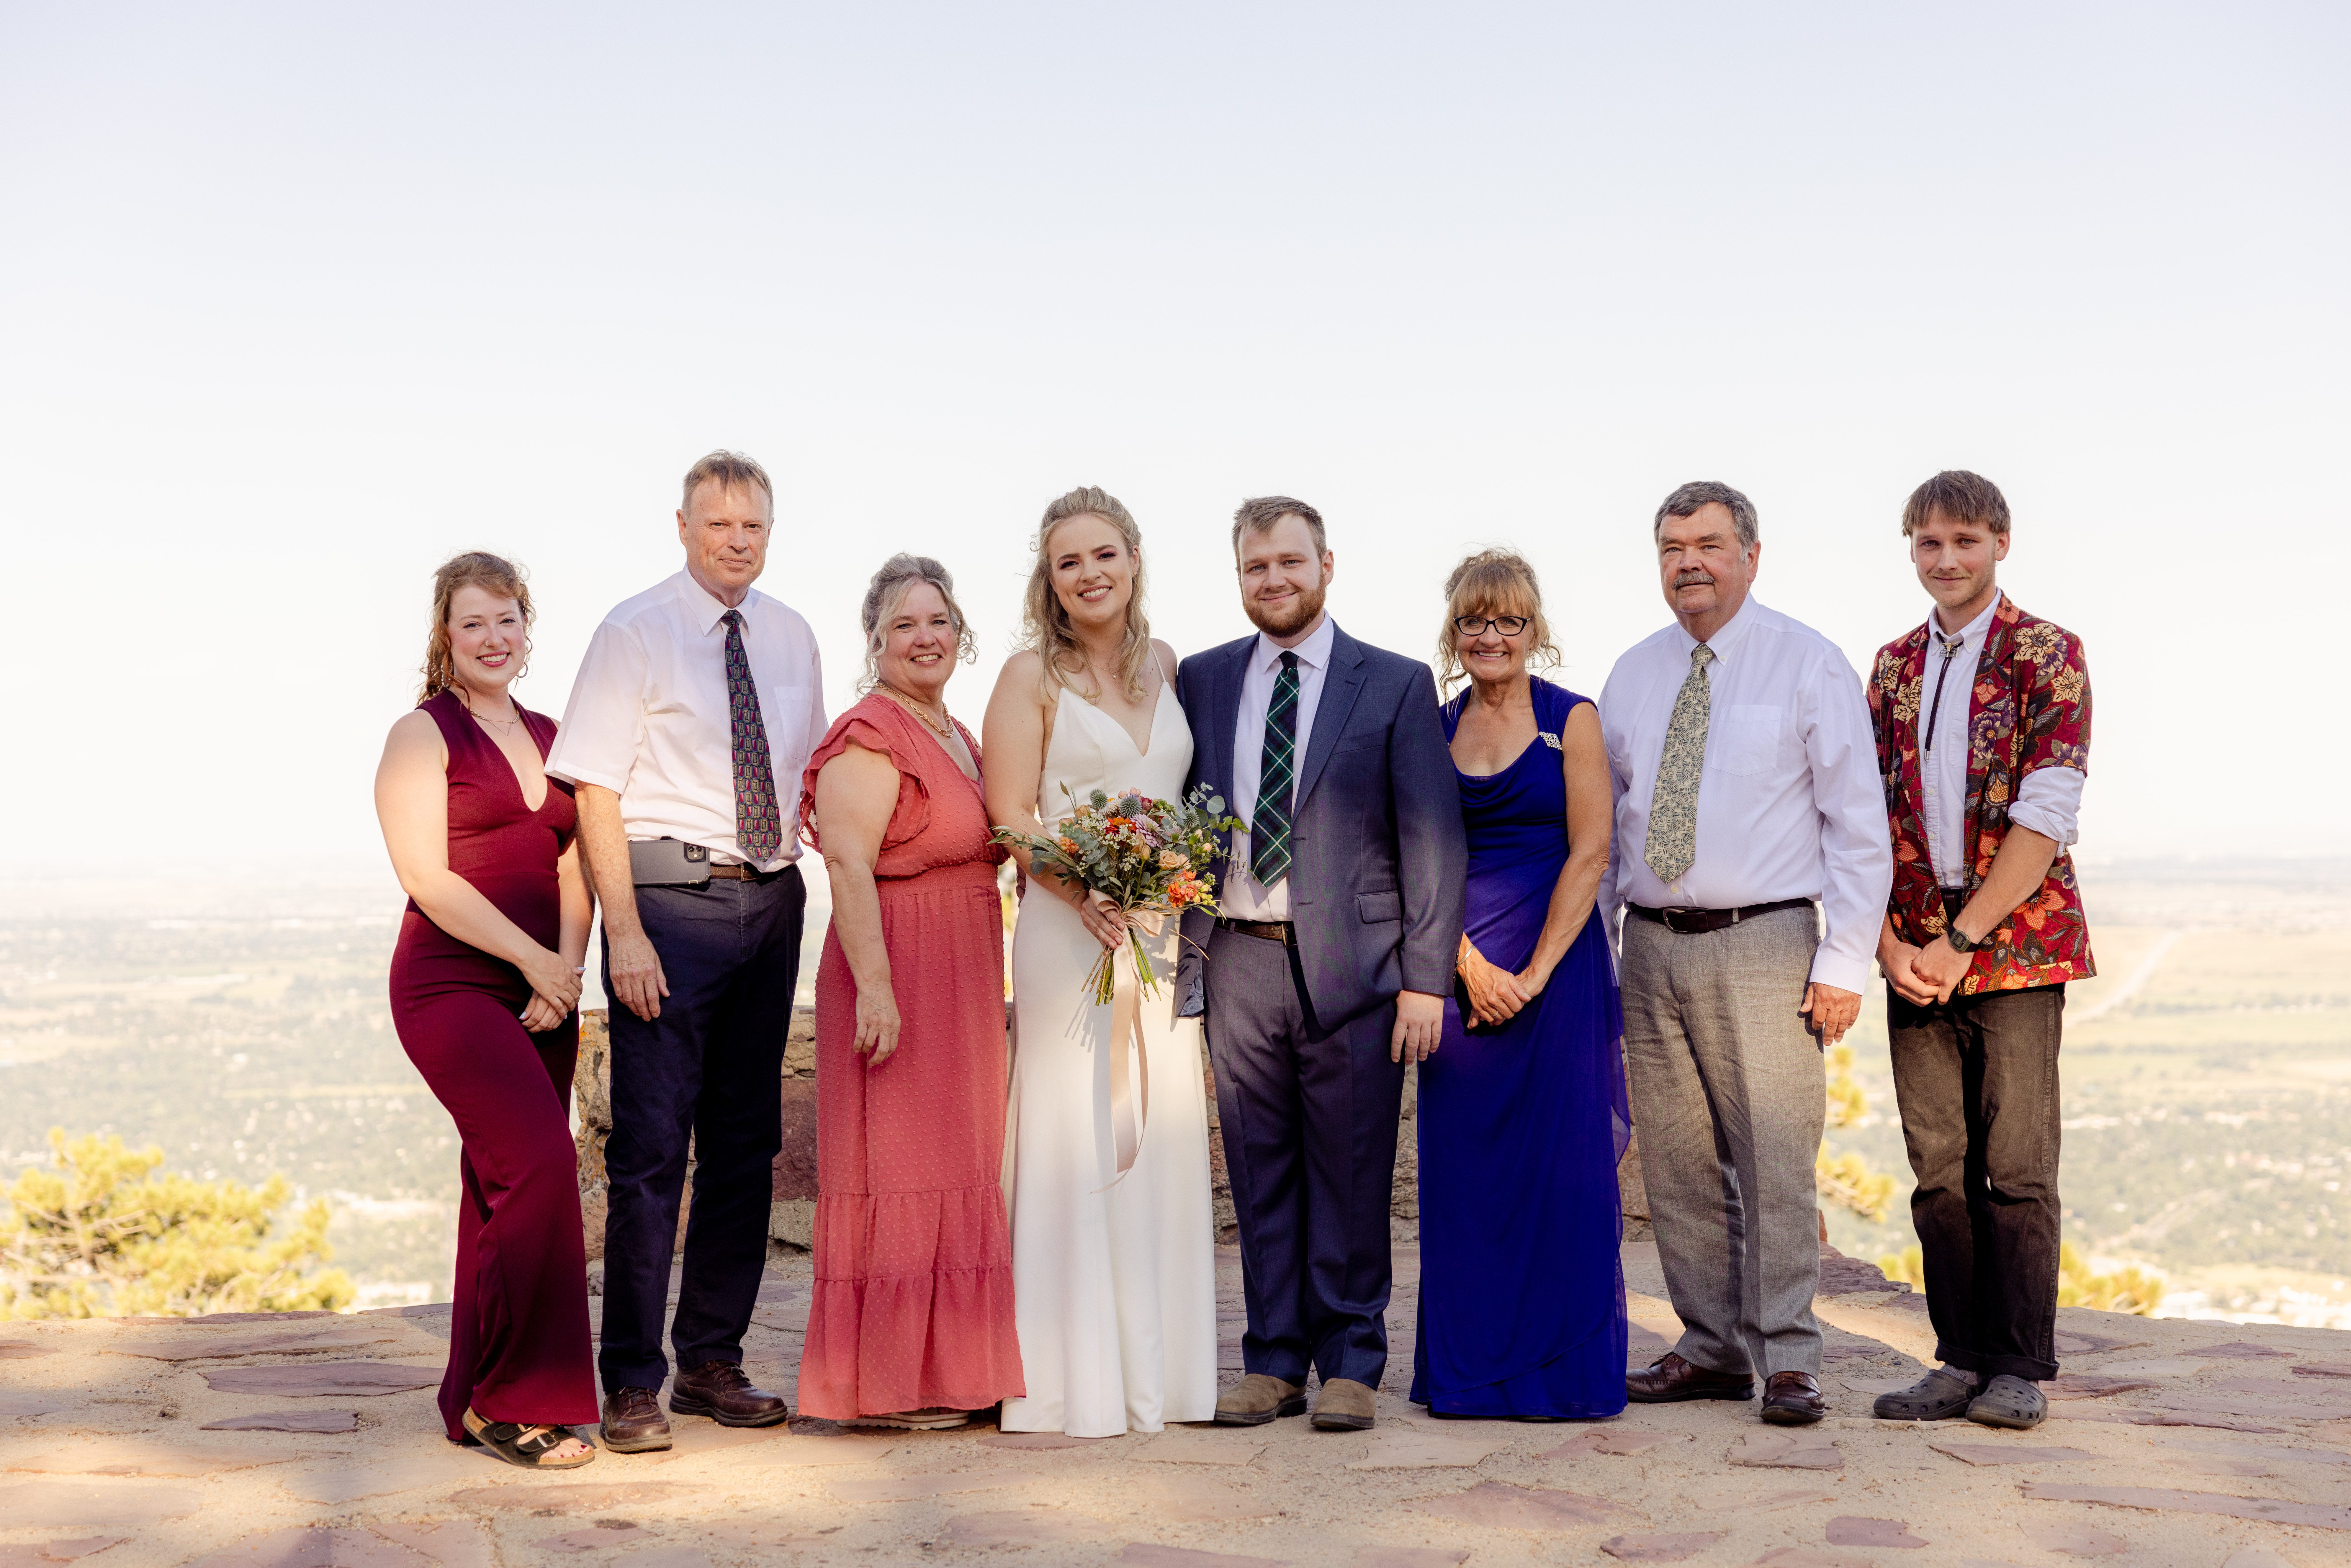 A group shot with the bride and groom's families after their Sunrise Amphitheater wedding.